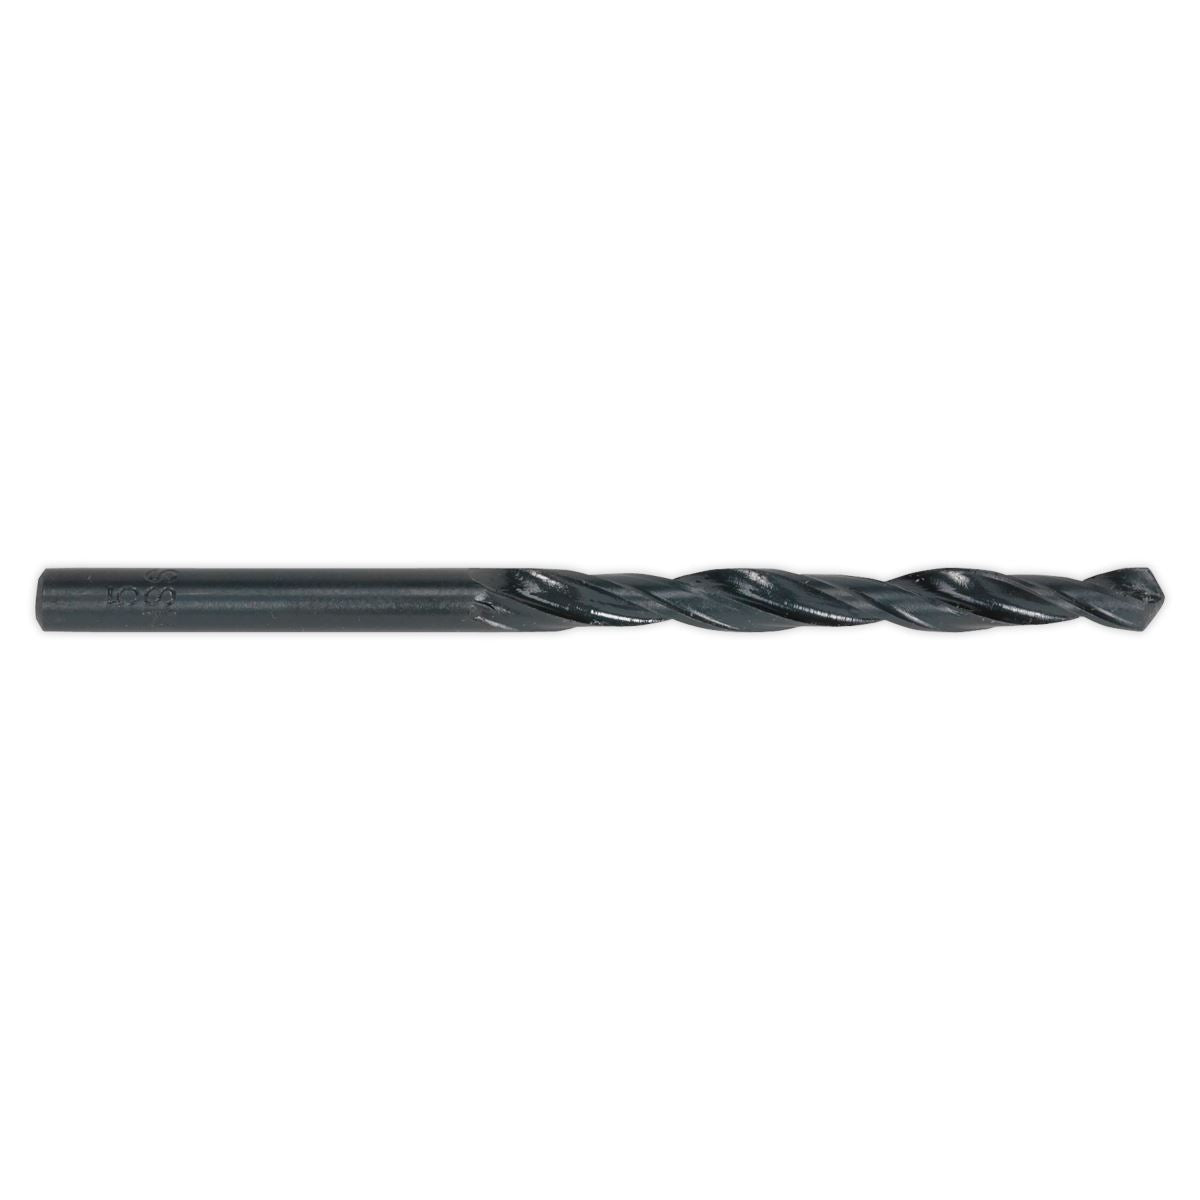 Sealey HSS Roll Forged Drill Bit Ø7/32" Pack of 10